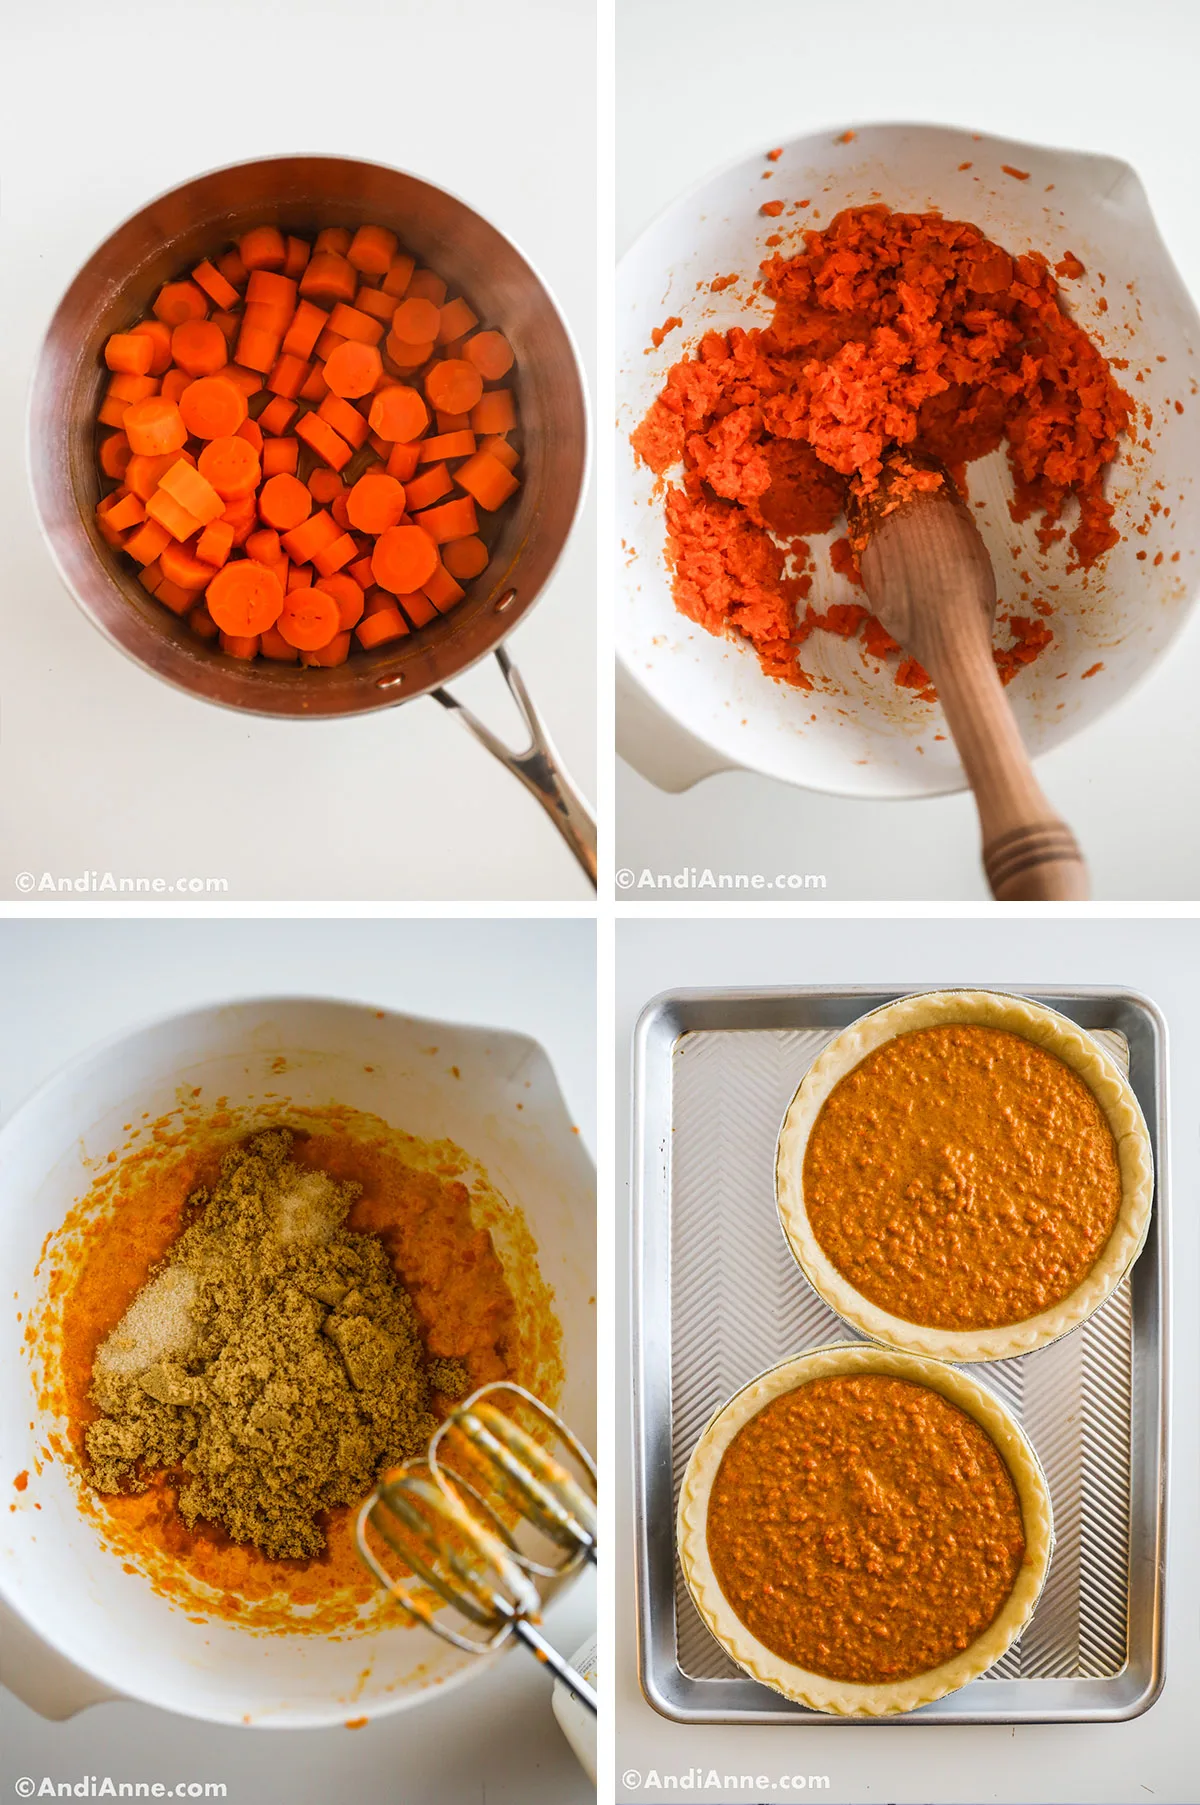 Four images showing steps to make a recipe including a pot of chopped carrots, pureed carrots in a bowl, brown sugar dumped over pureed carrots in a bowl, and two unbaked carrot pies on a baking sheet.